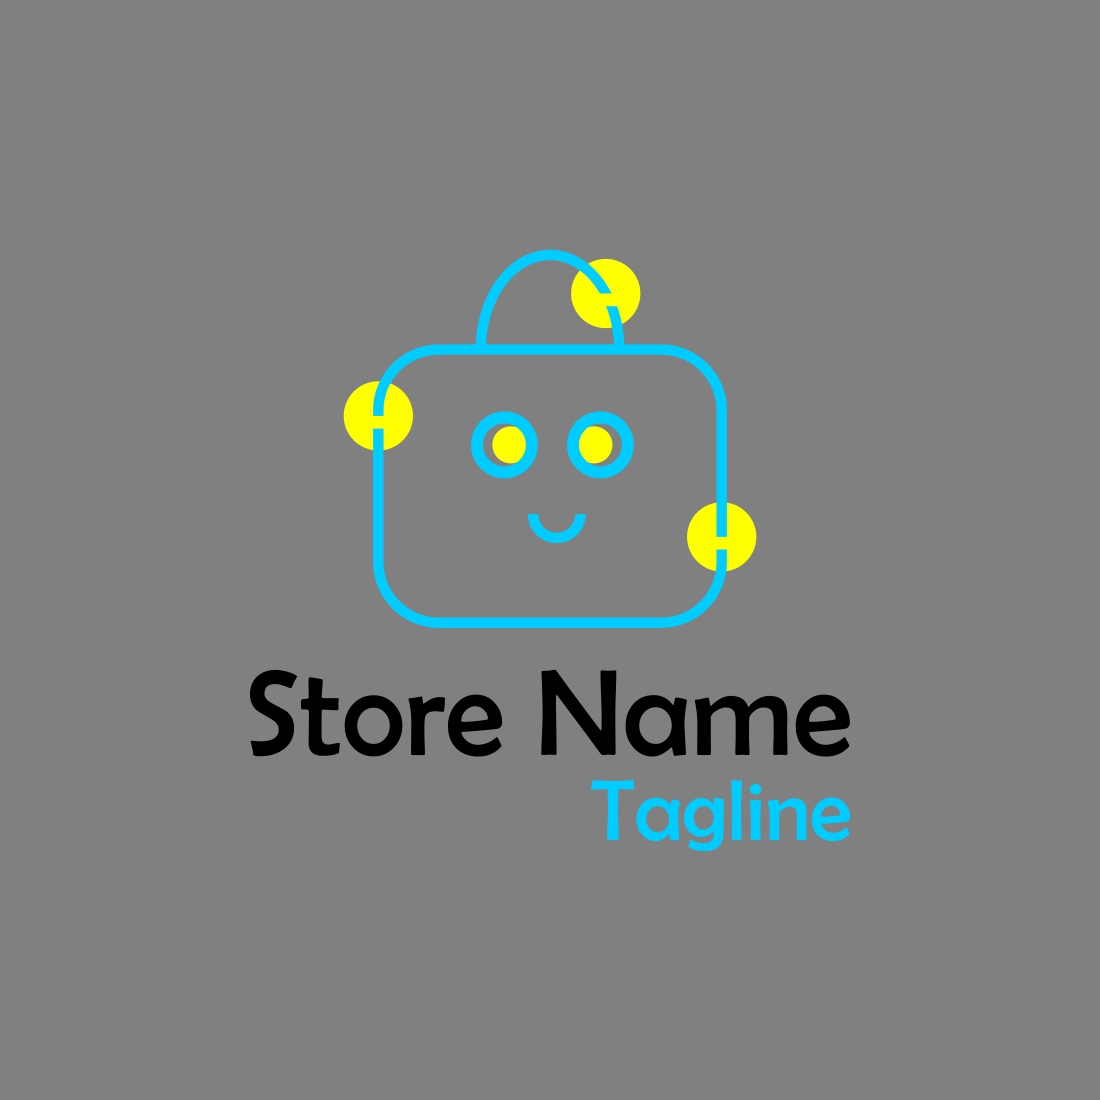 Minimalist Shopping and Store logo preview image.